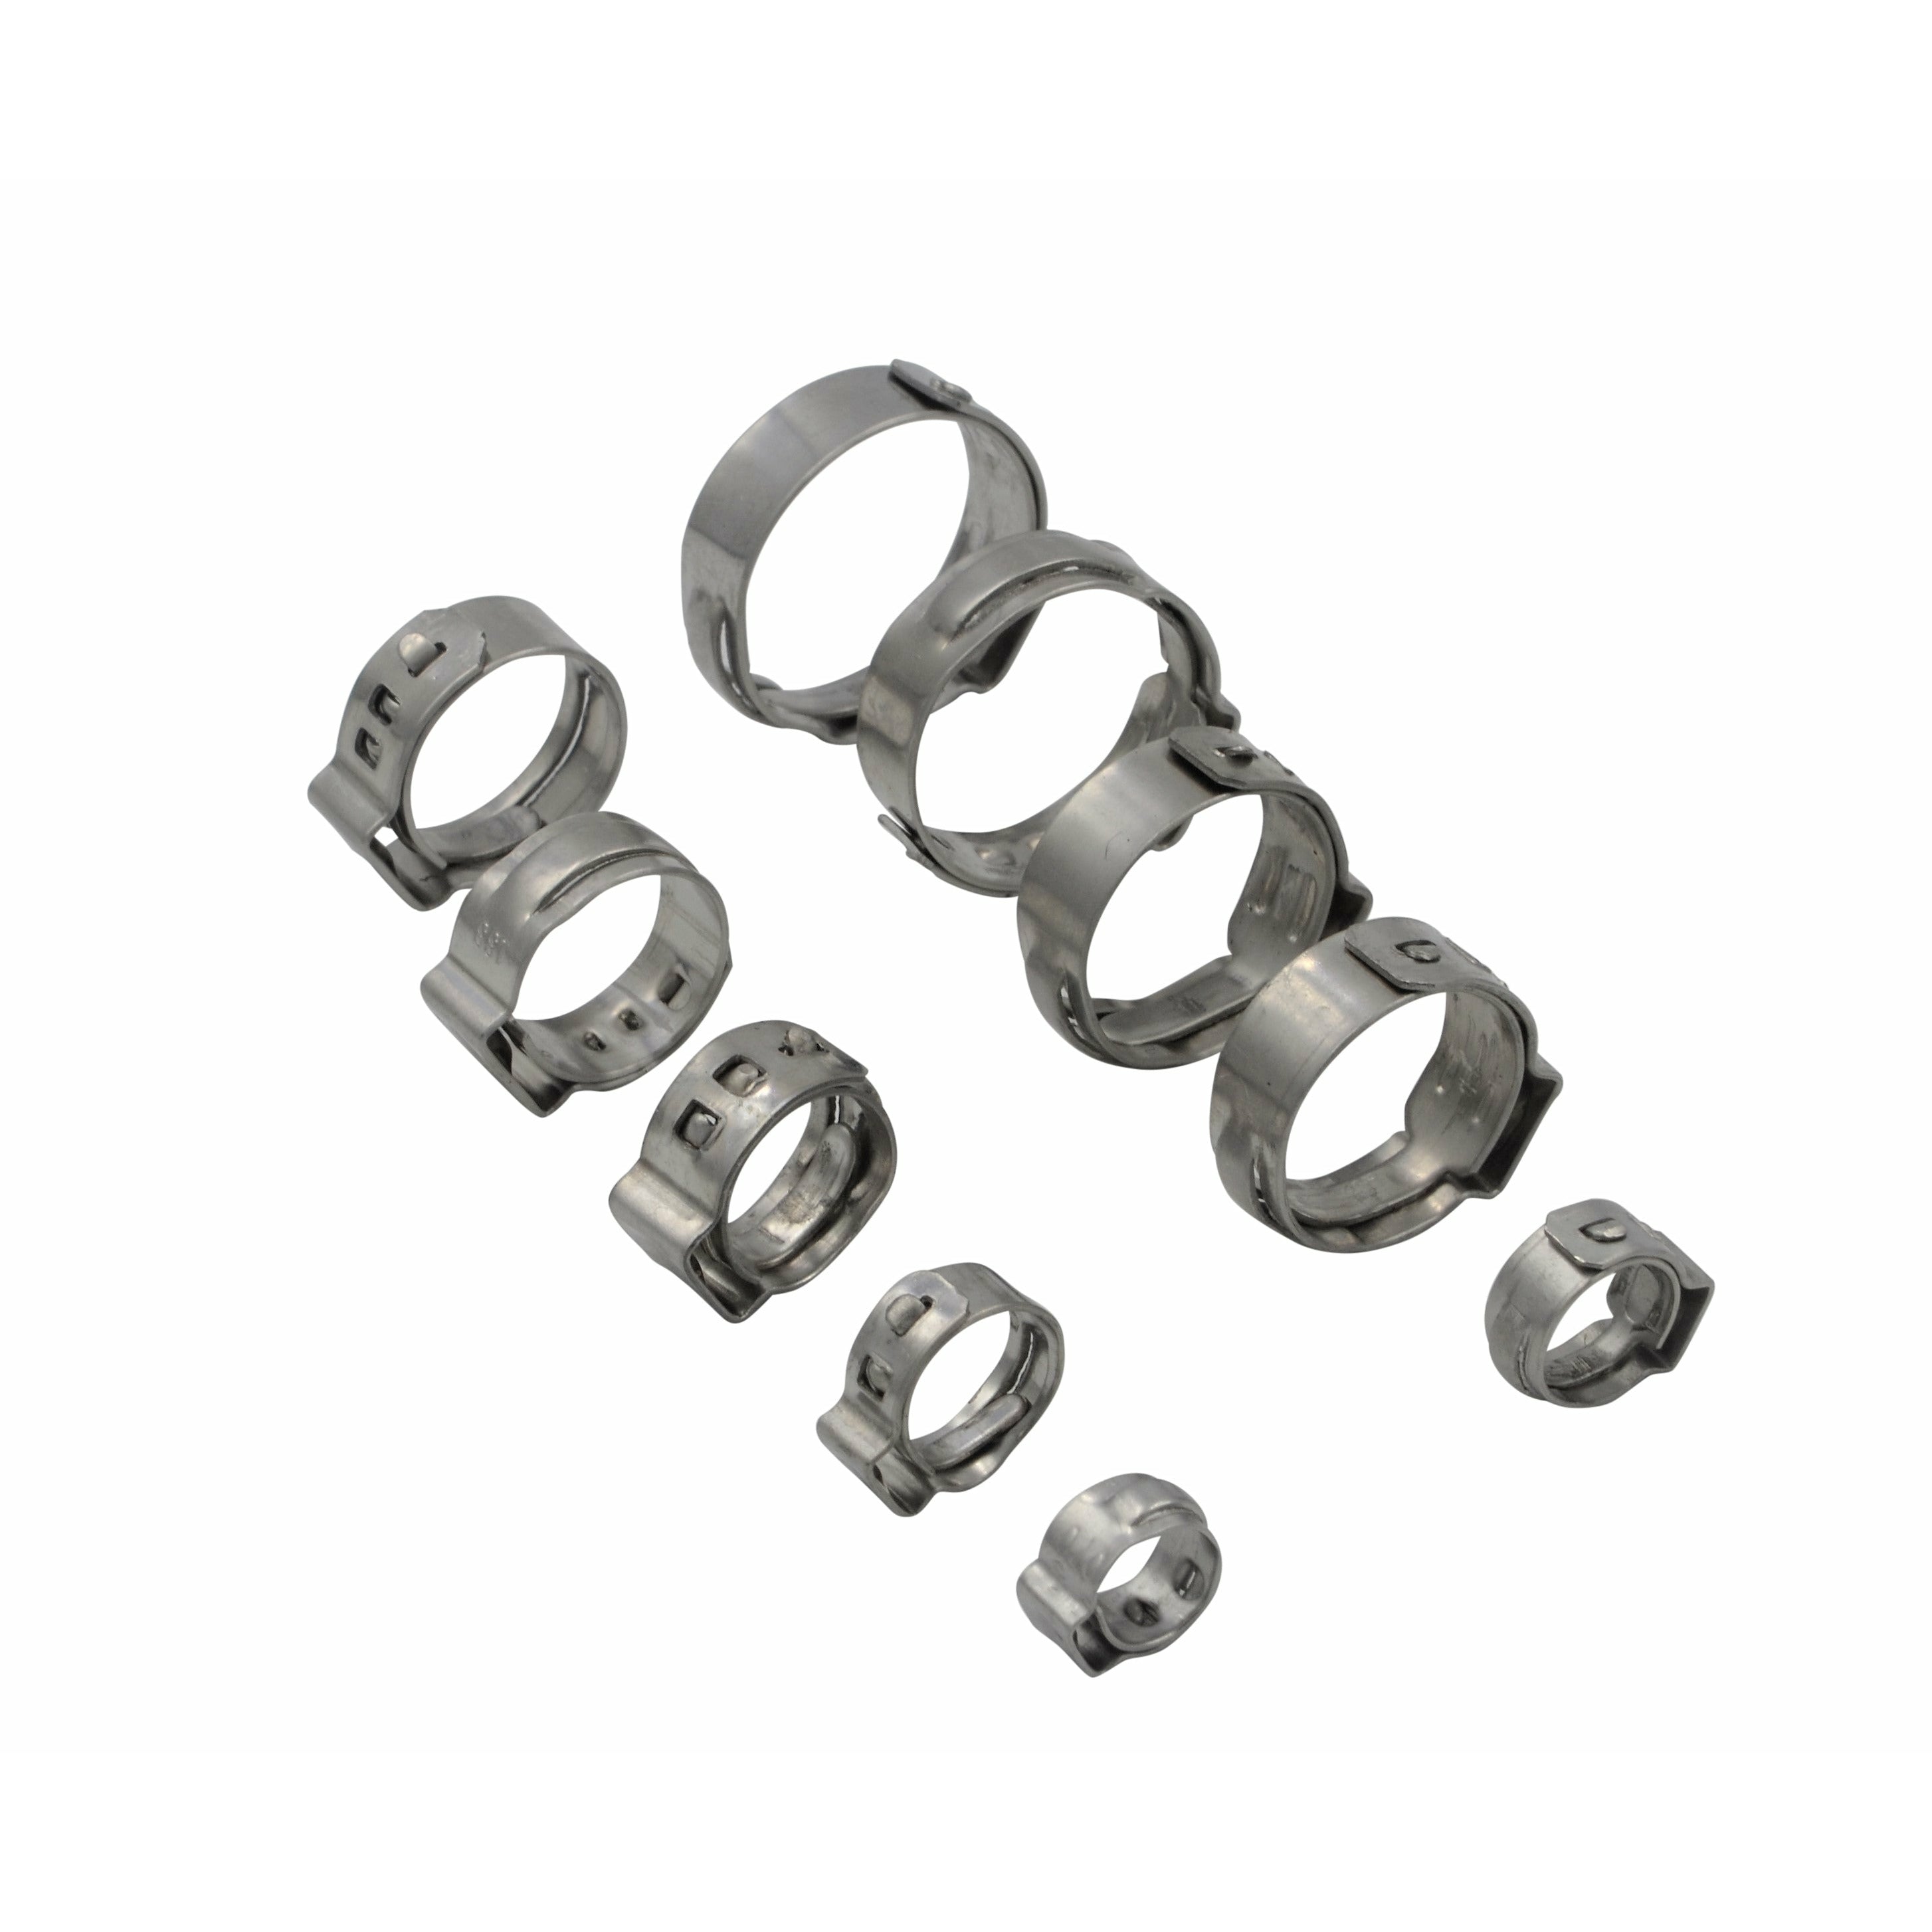 100 Piece 304 Stainless Steel 13.5-16.2mm Ear Hose Clamp Grab Kit Assortment